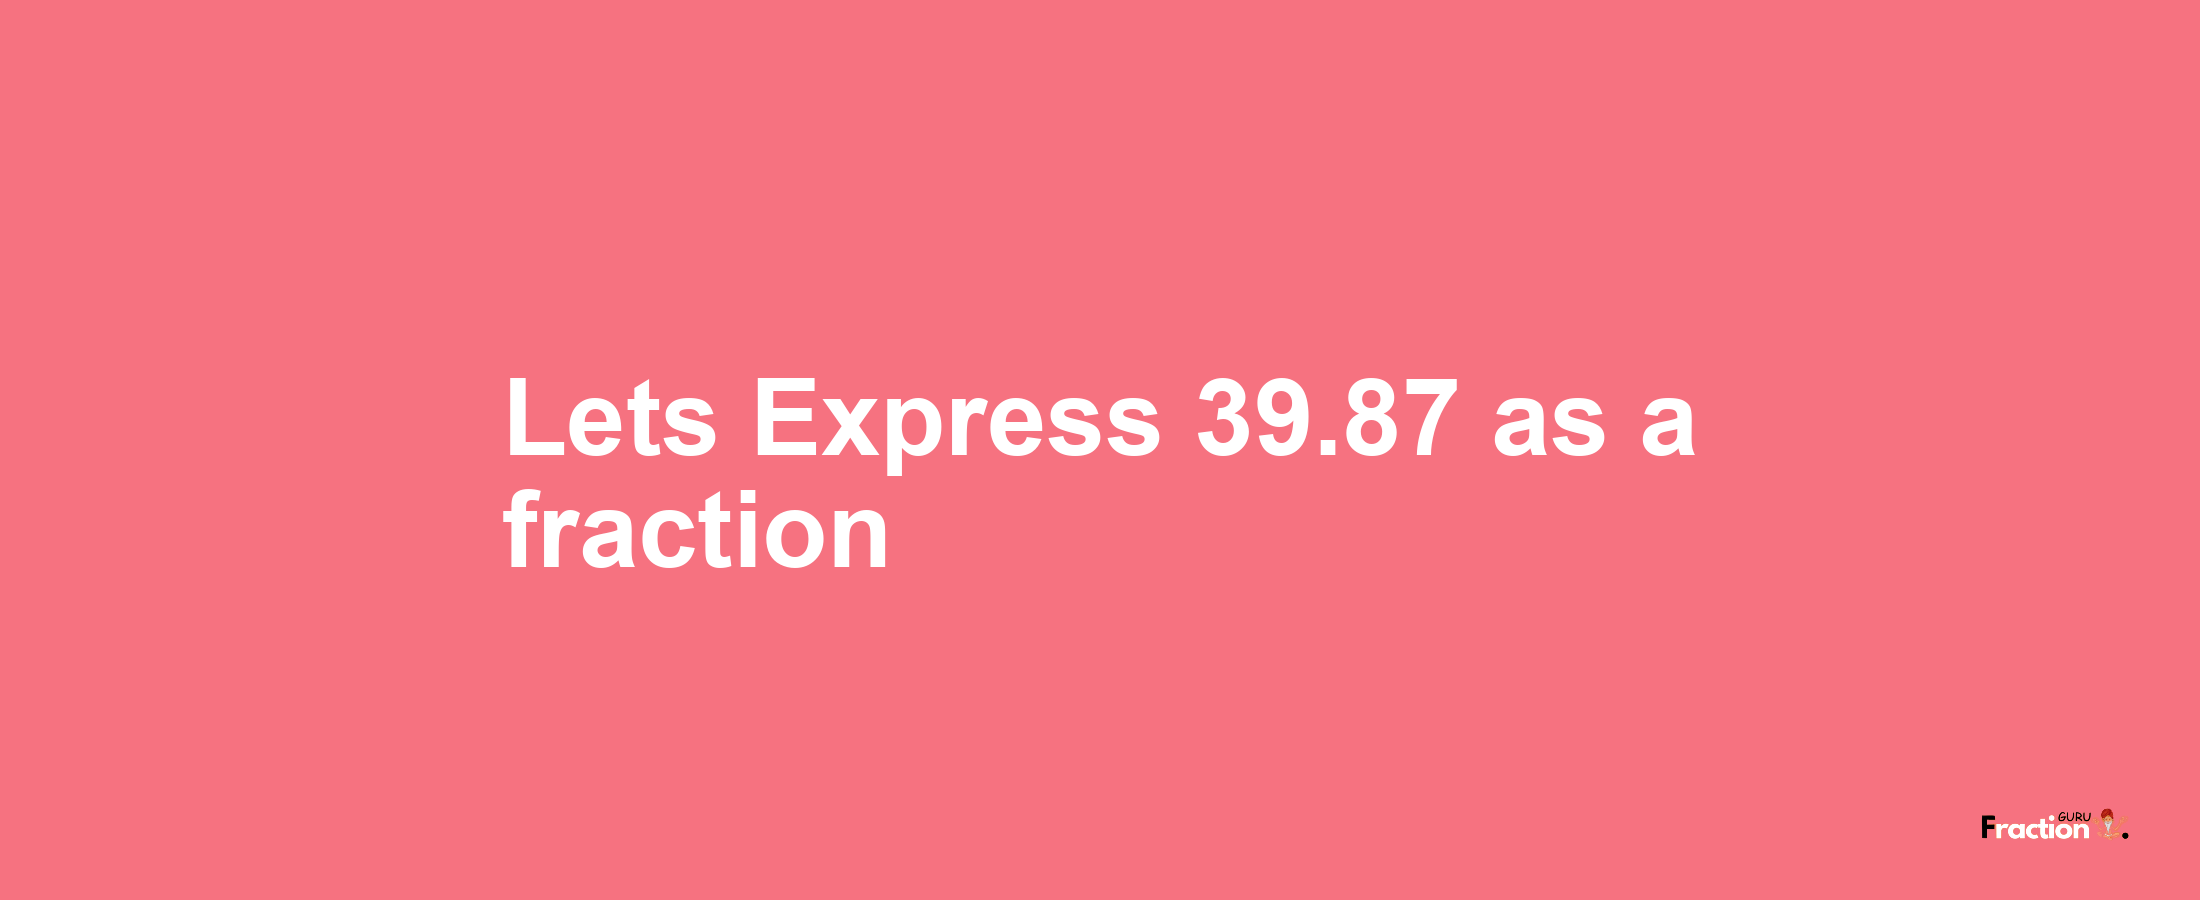 Lets Express 39.87 as afraction